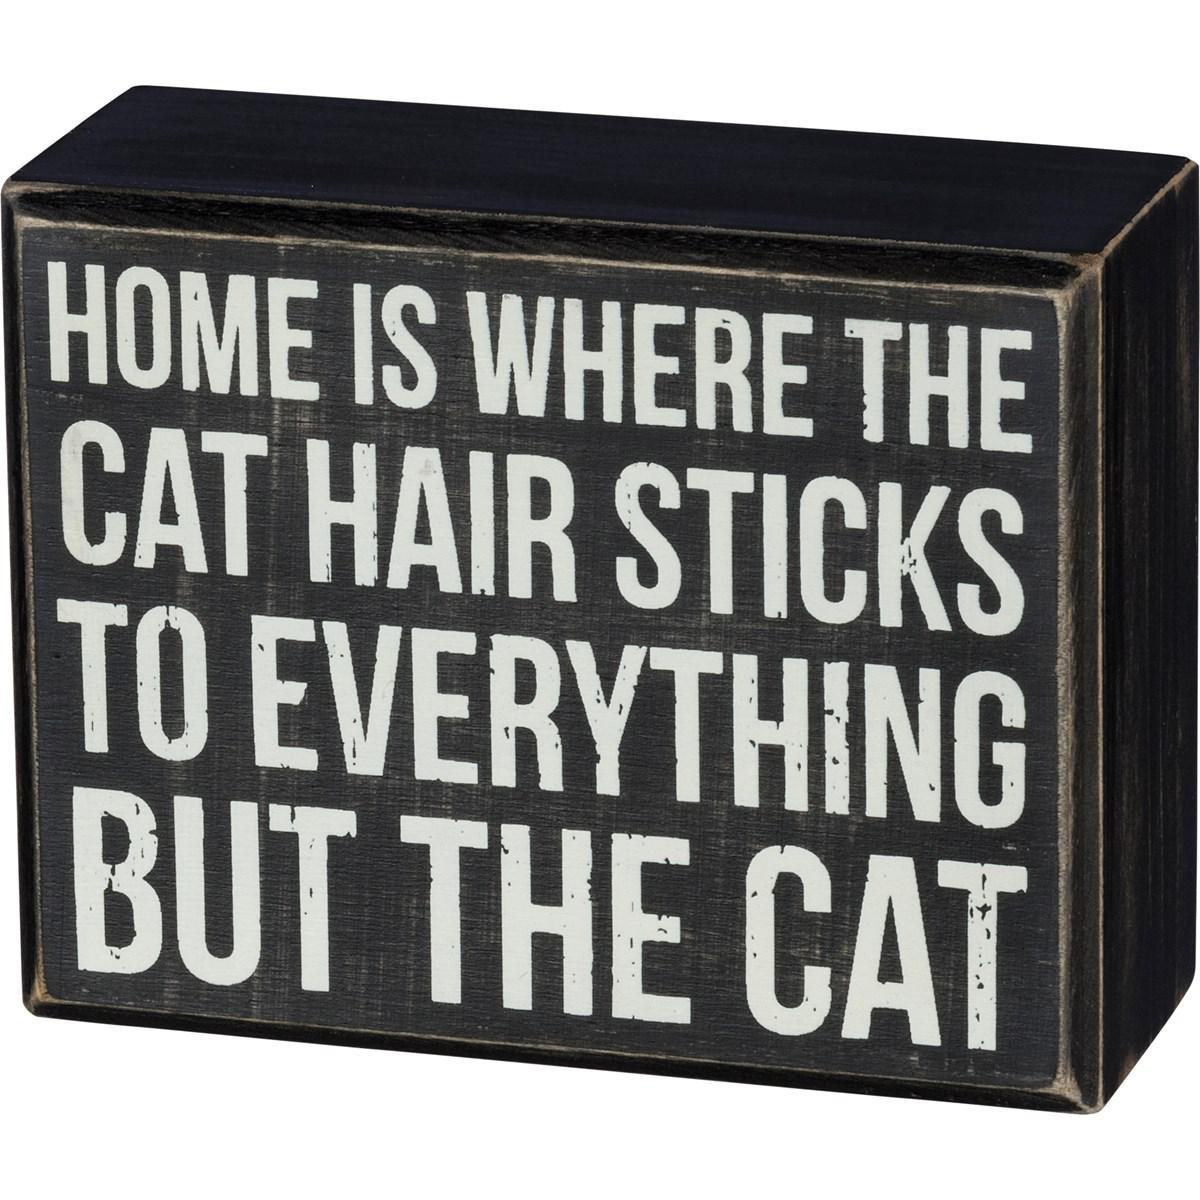 Home Is Where The Cat Hair Sticks To Everything But The Cat